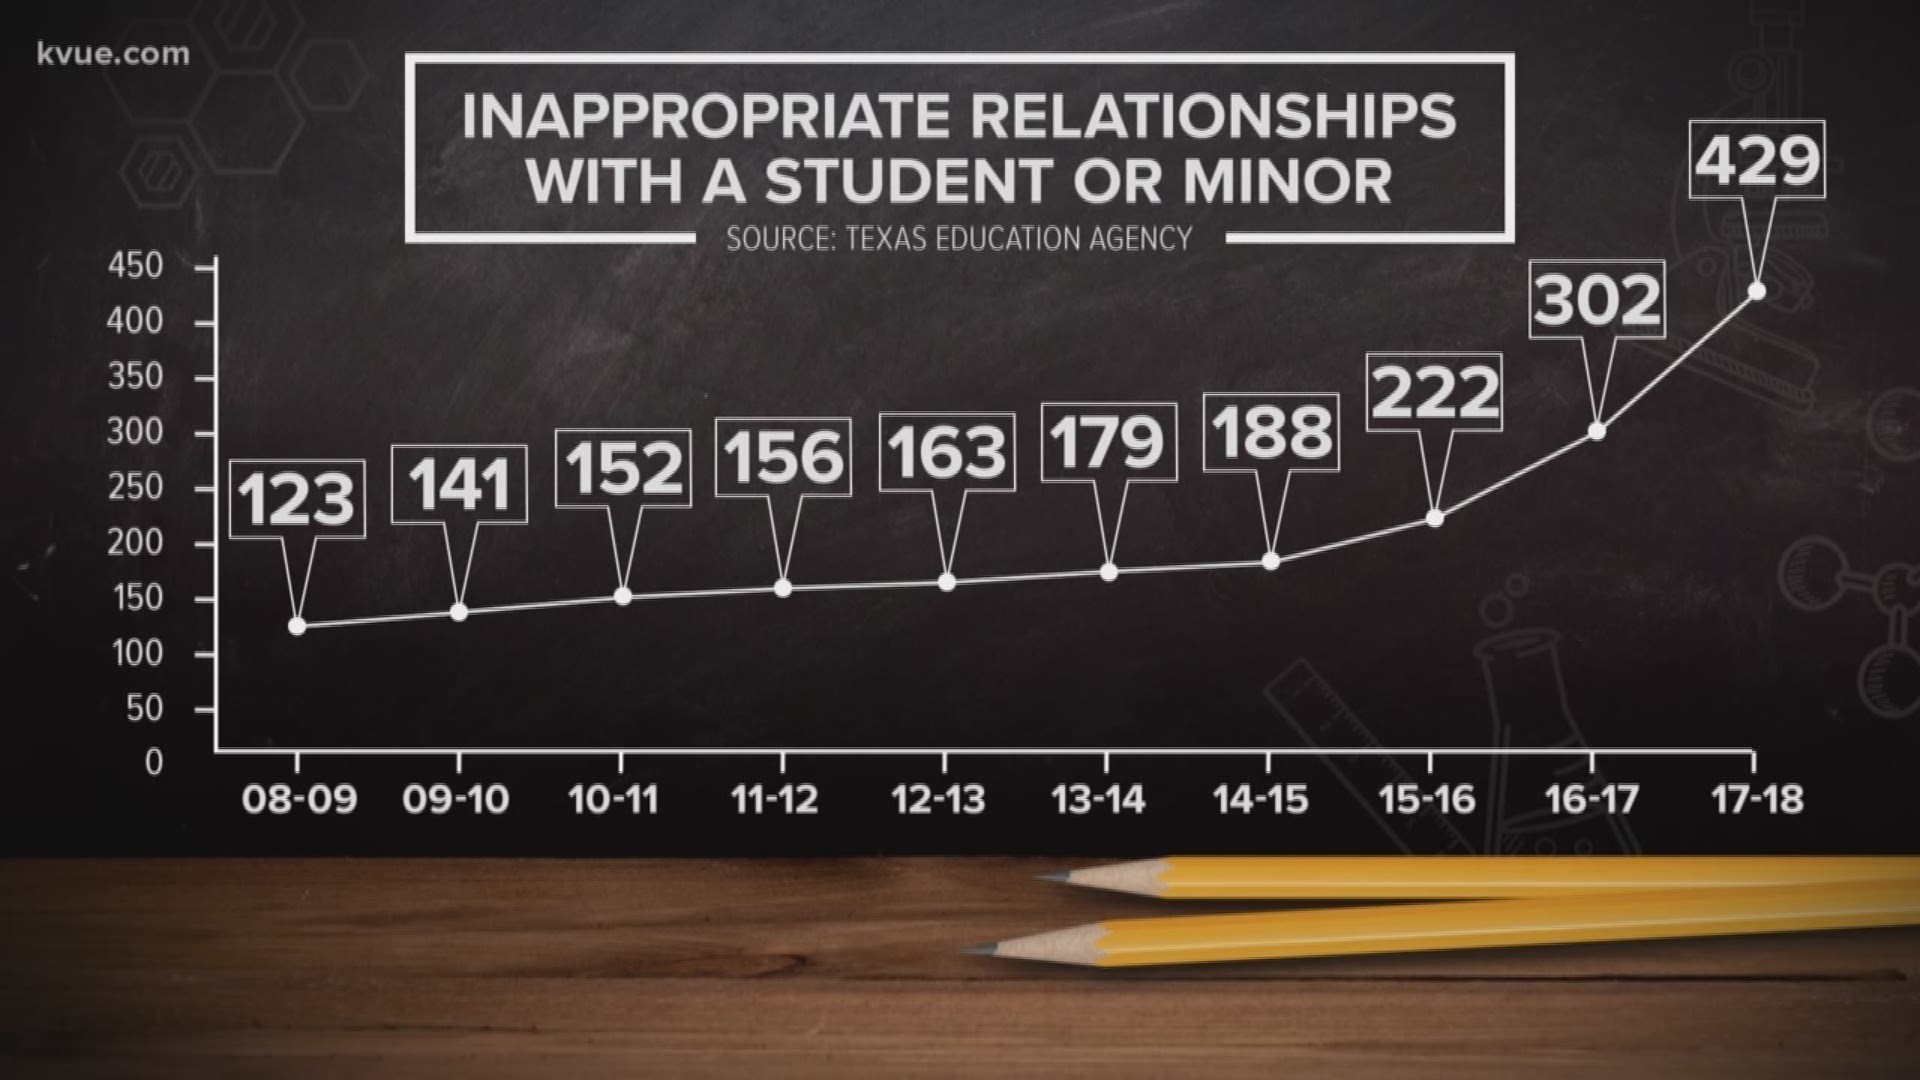 Data obtained from the Texas Education Agency shows a 142 percent increase since last fiscal year in the number of opened investigations regarding allegations of inappropriate relationships with minors and students.